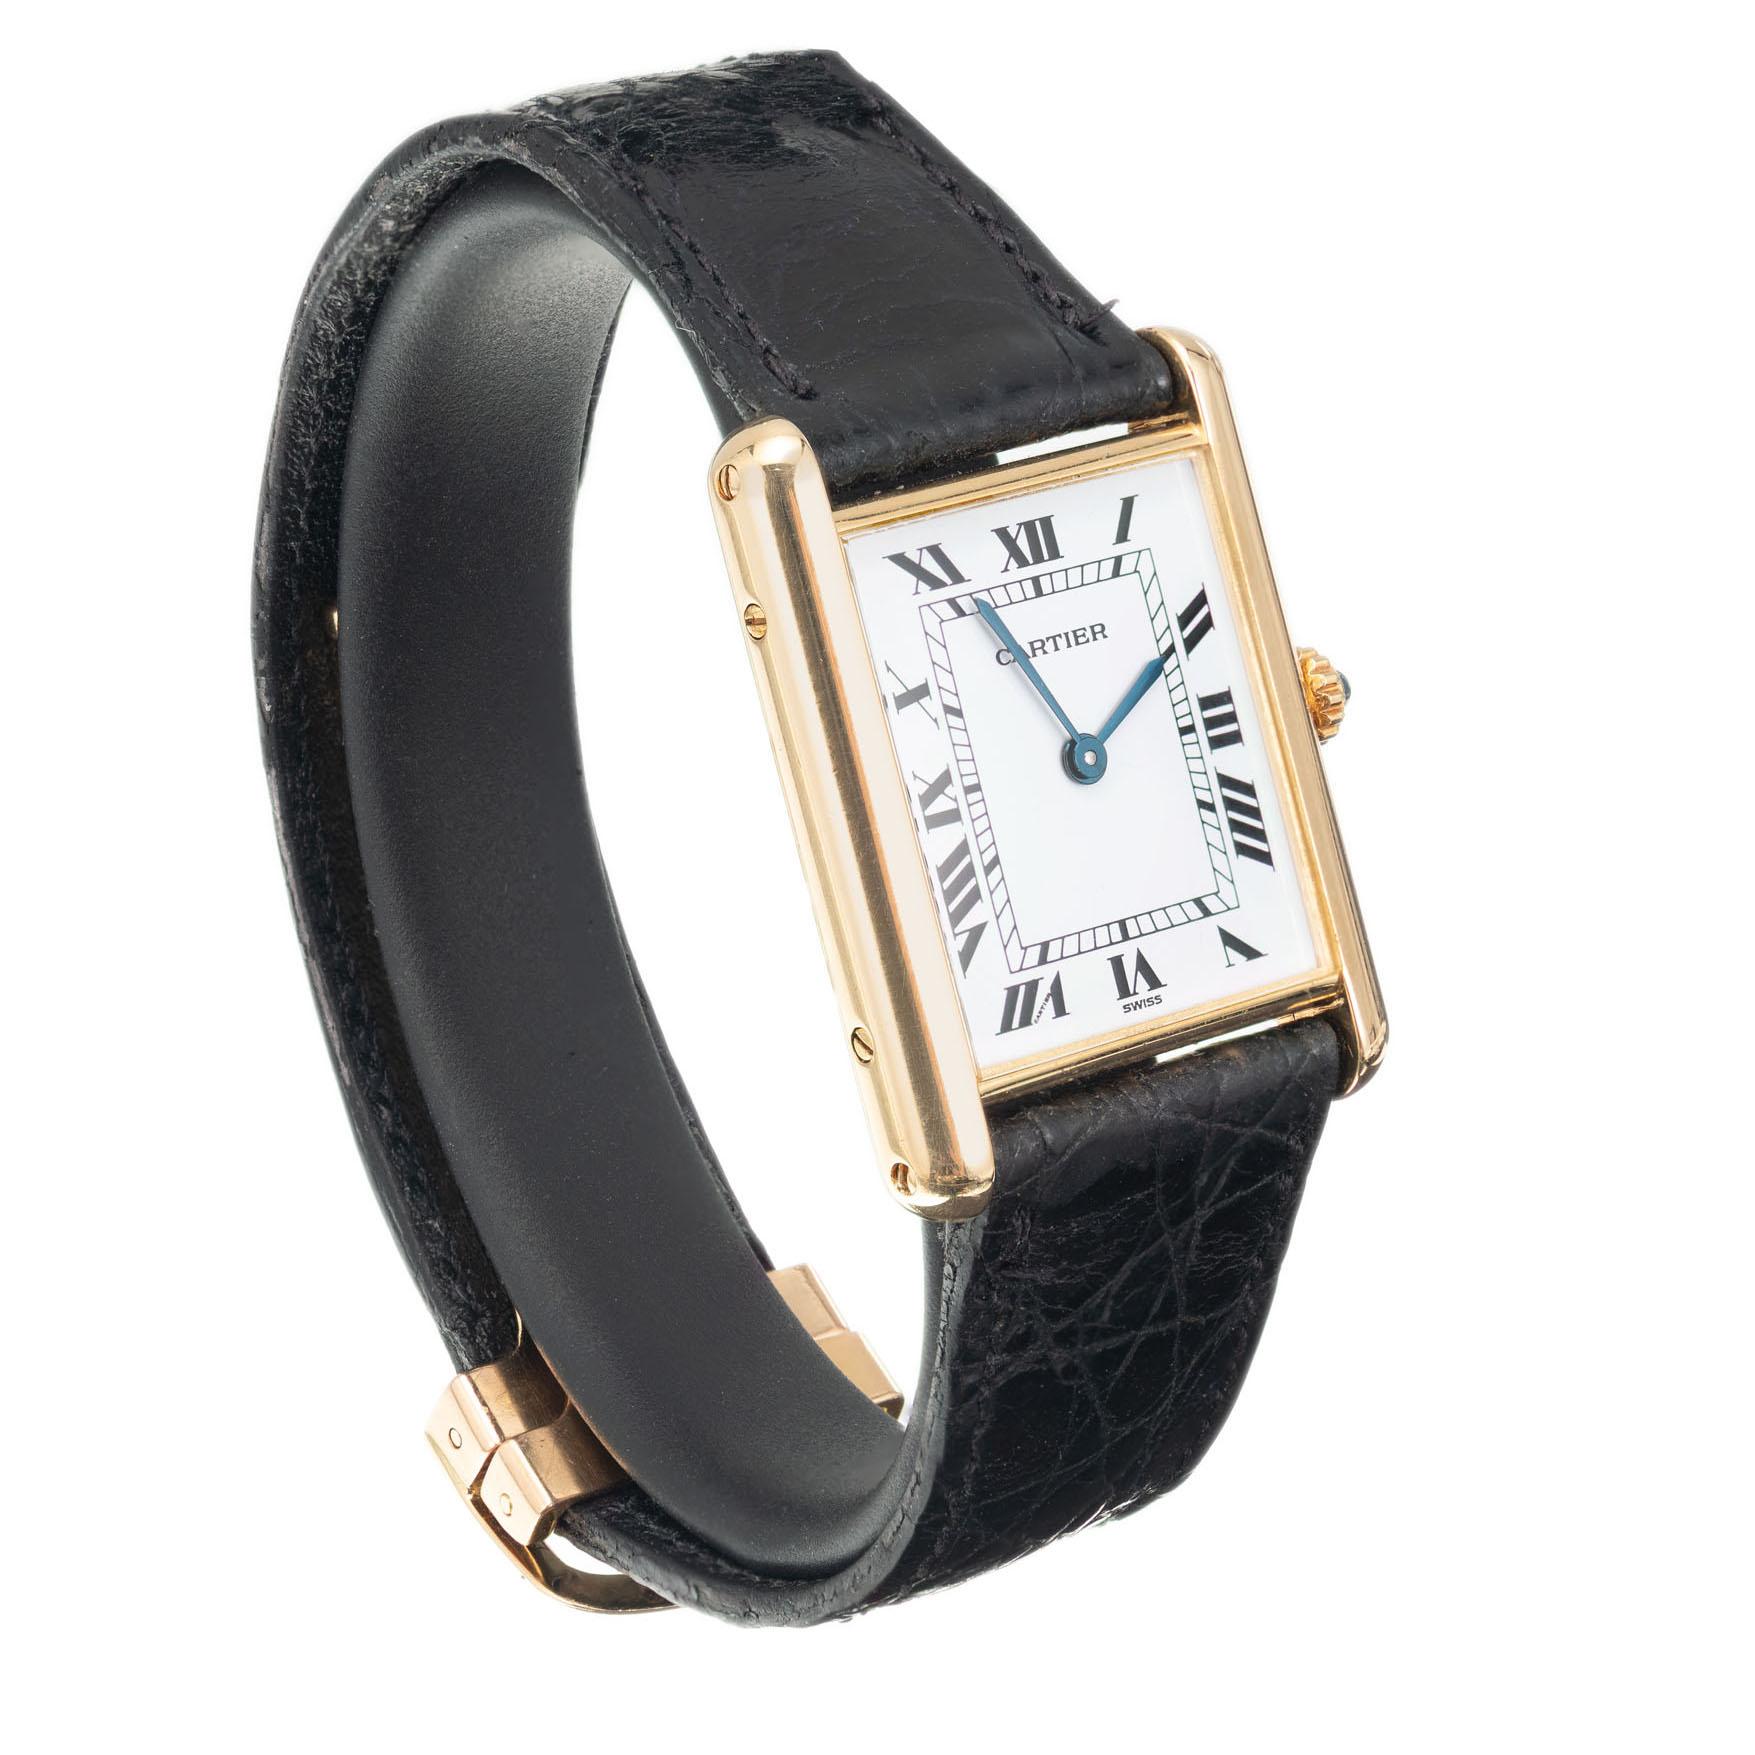 Cartier Tank Louis Quartz 18k yellow gold with Cartier band and 18k Cartier deployment buckle 

Length: 30.62mm
Width: 23.41mm
Band width at case: 17.52m
Case thickness: 5.54mm
Band: Black Cartier
Crystal: sapphire
Dial: white
Outside case: Cartier